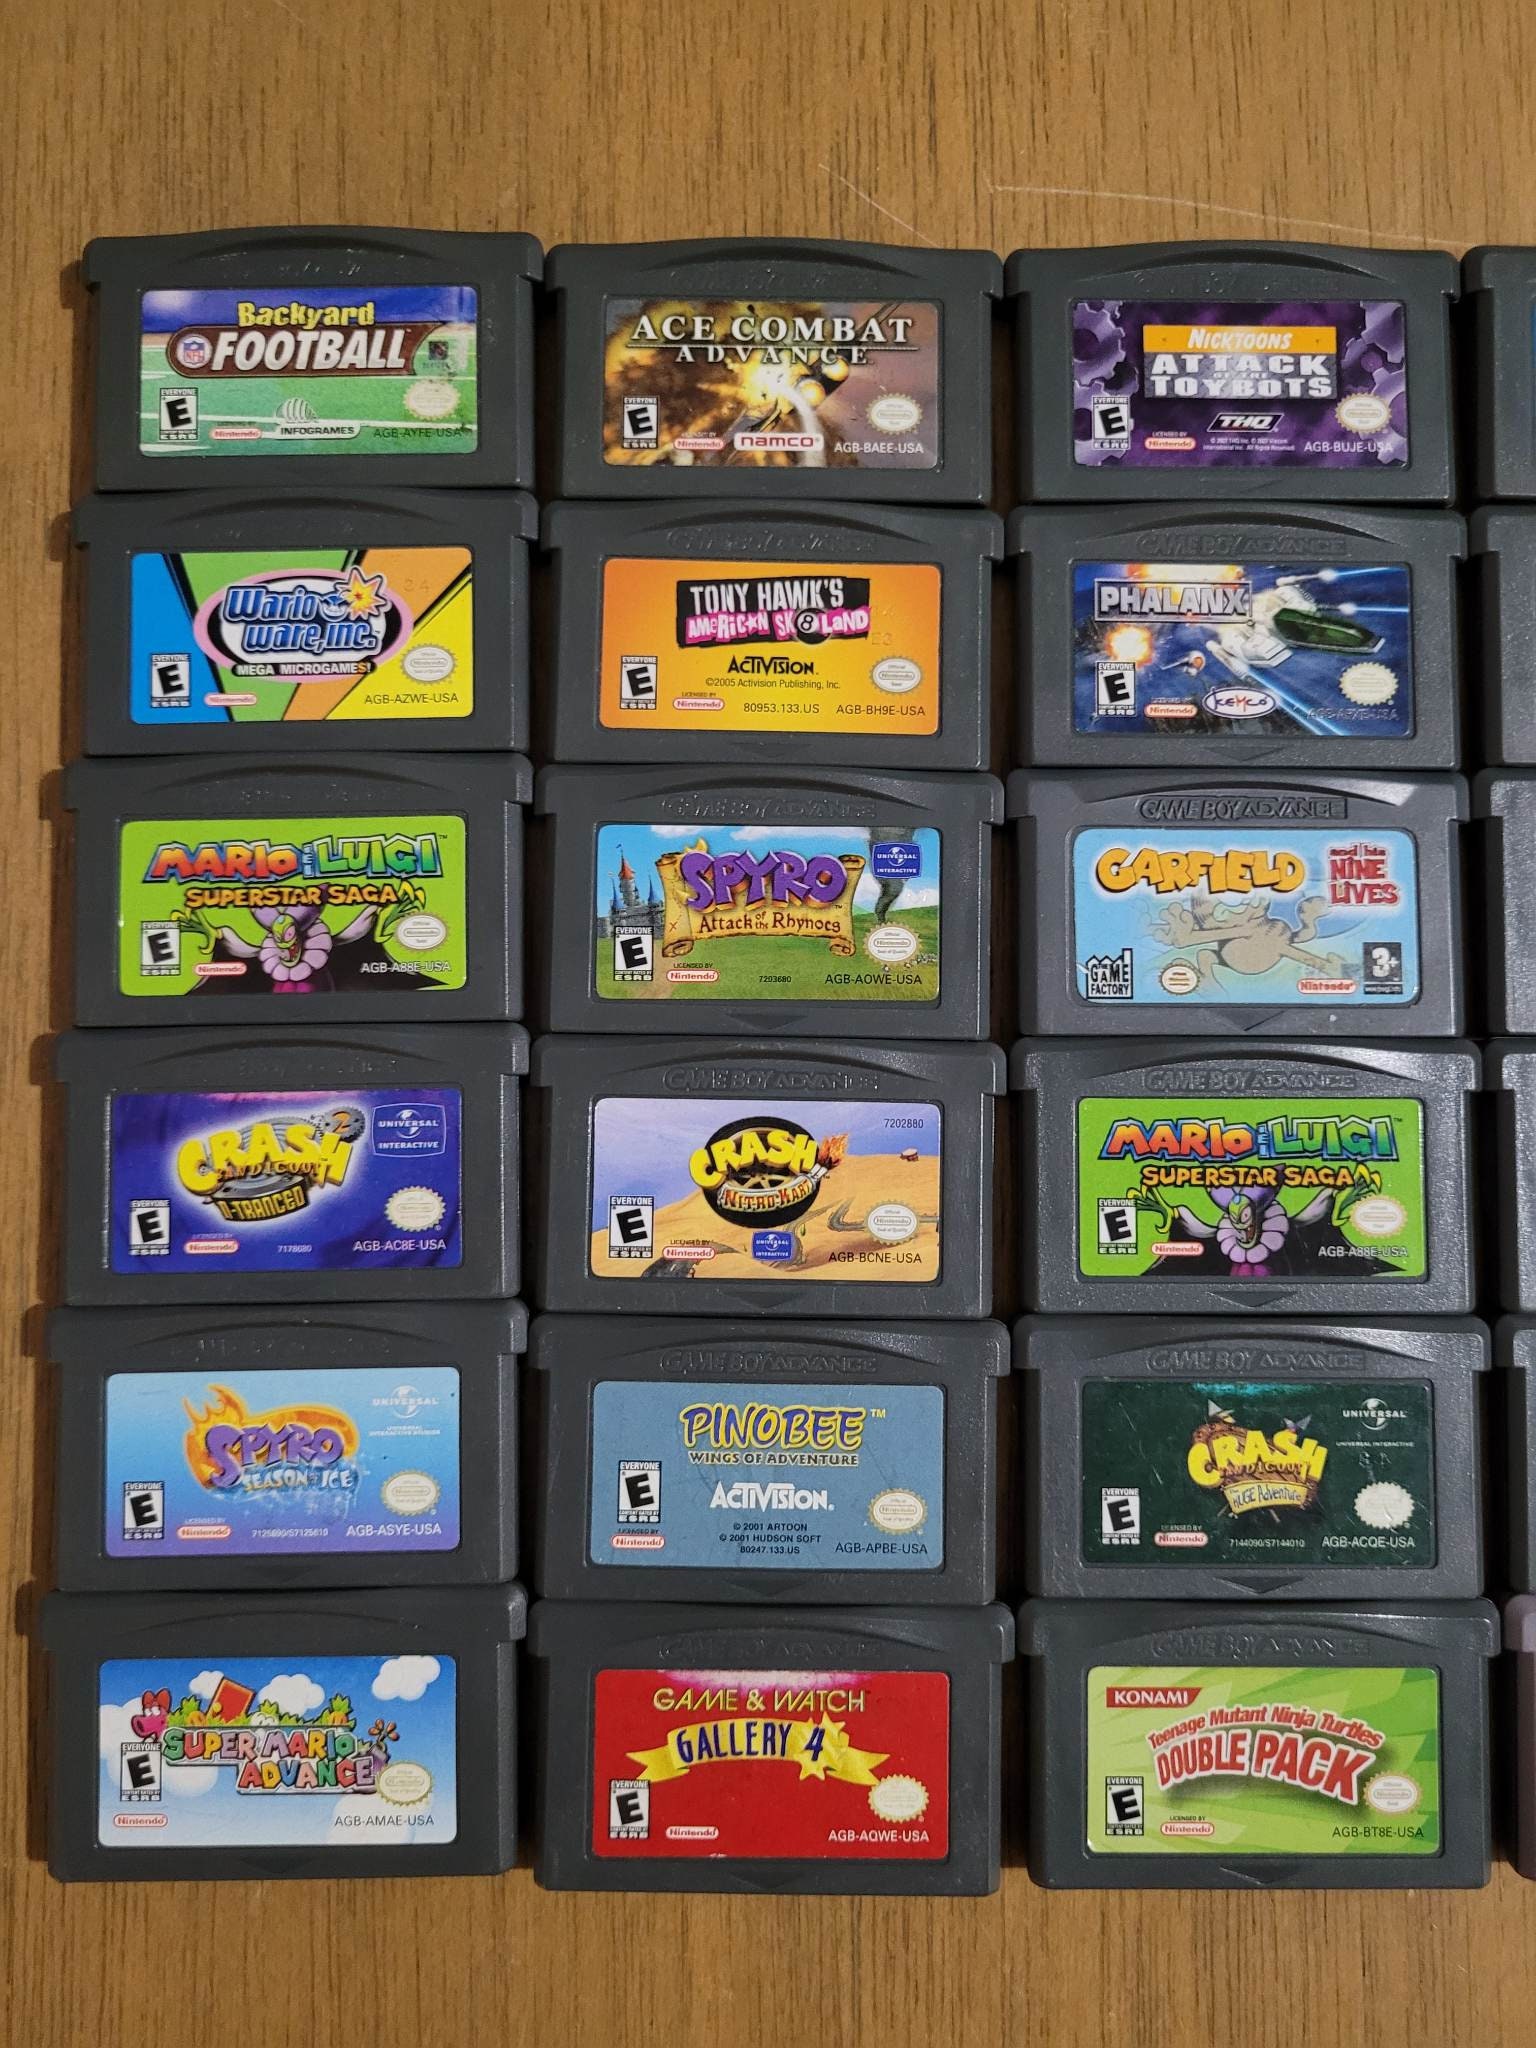 ALL AUTHENTIC and TESTED GameBoy Advance Games - Pick and Choose